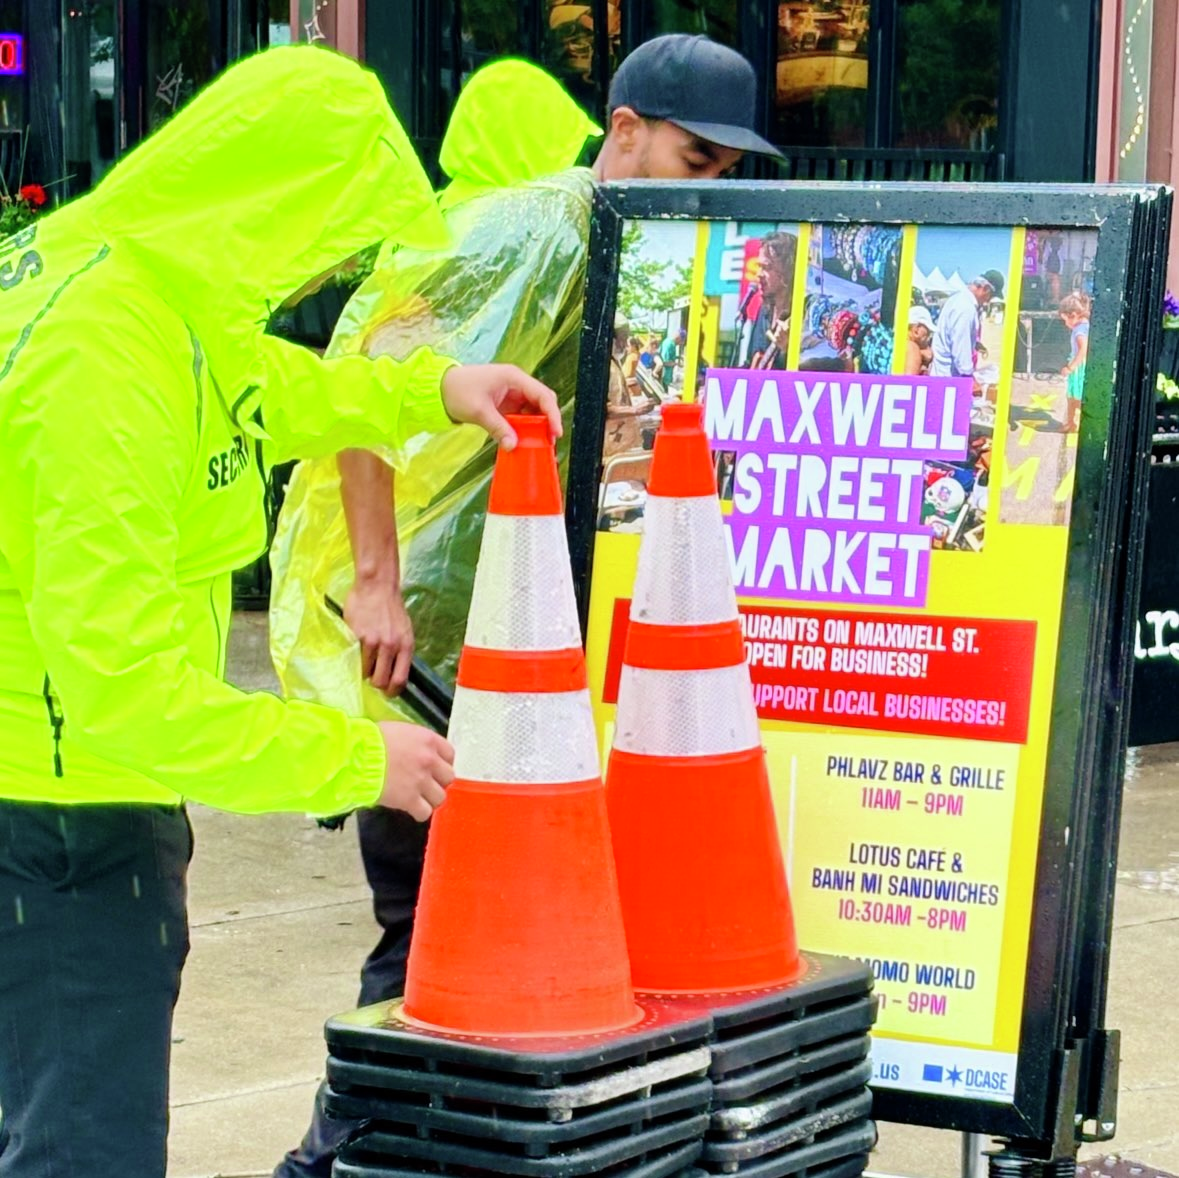 Severe weather delays return of Chicago's Maxwell Street Market